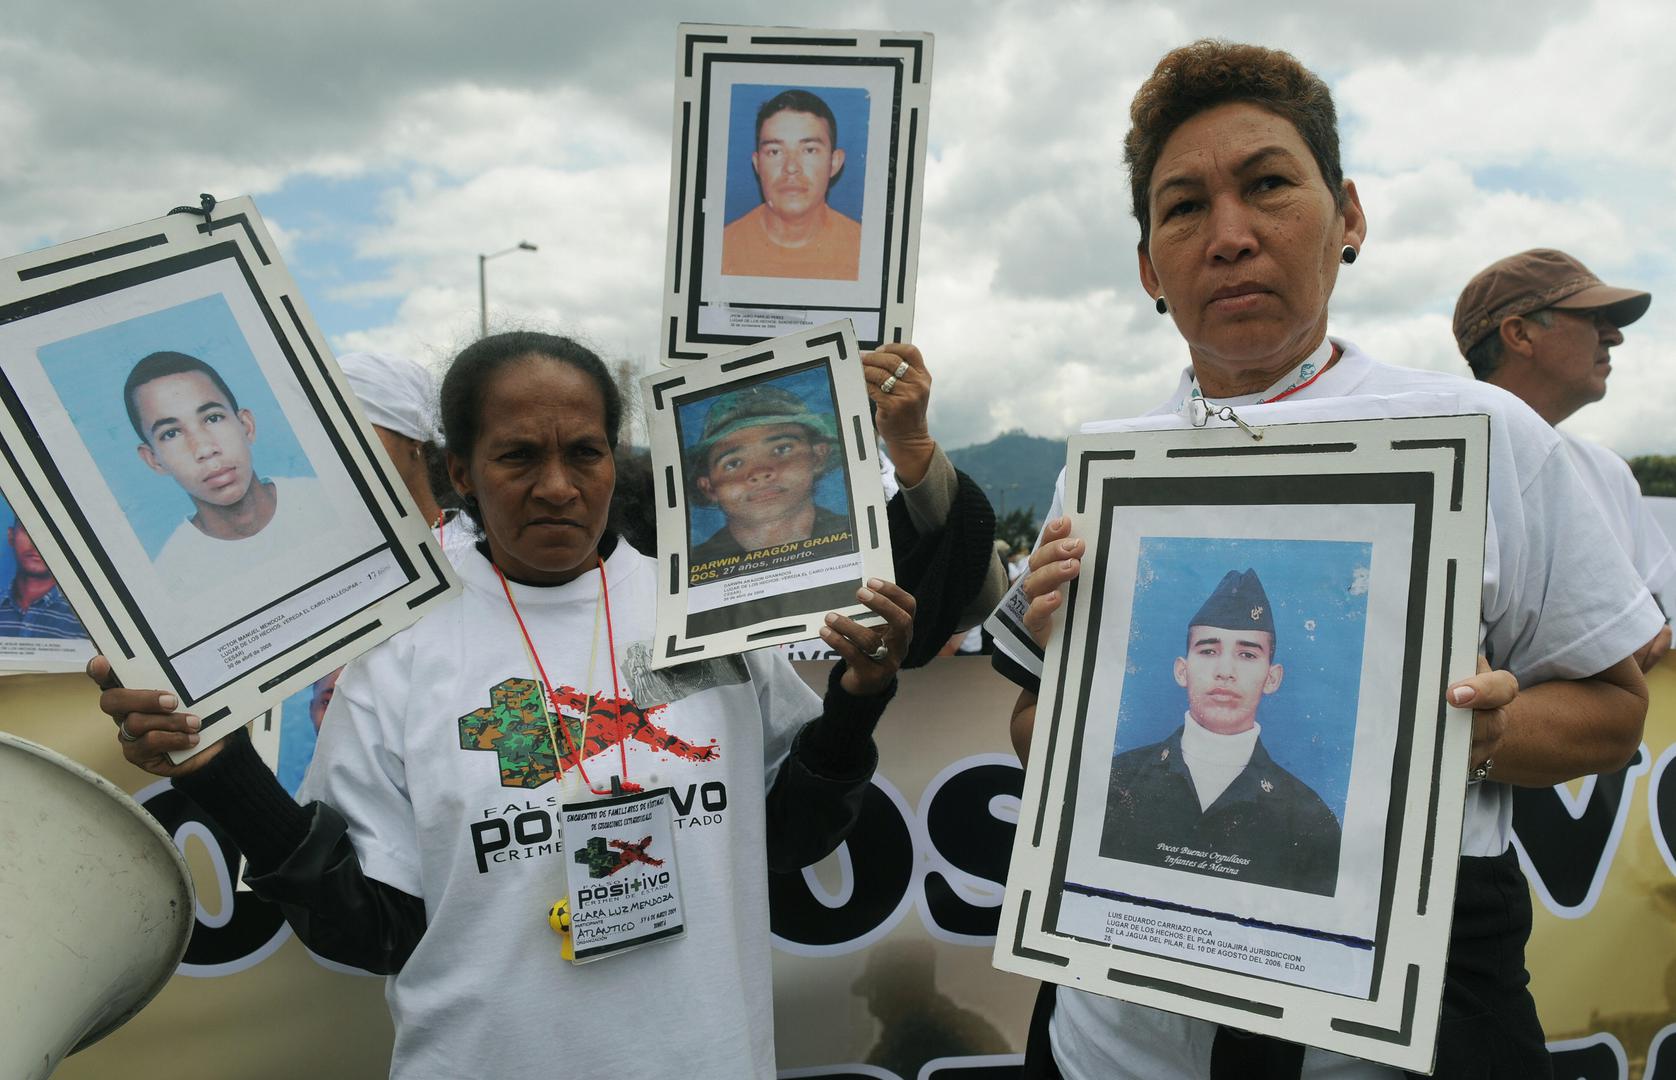 Relatives hold pictures of their beloved during a March 6, 2009 march in Bogota against the “false positive” killings and enforced disappearances.